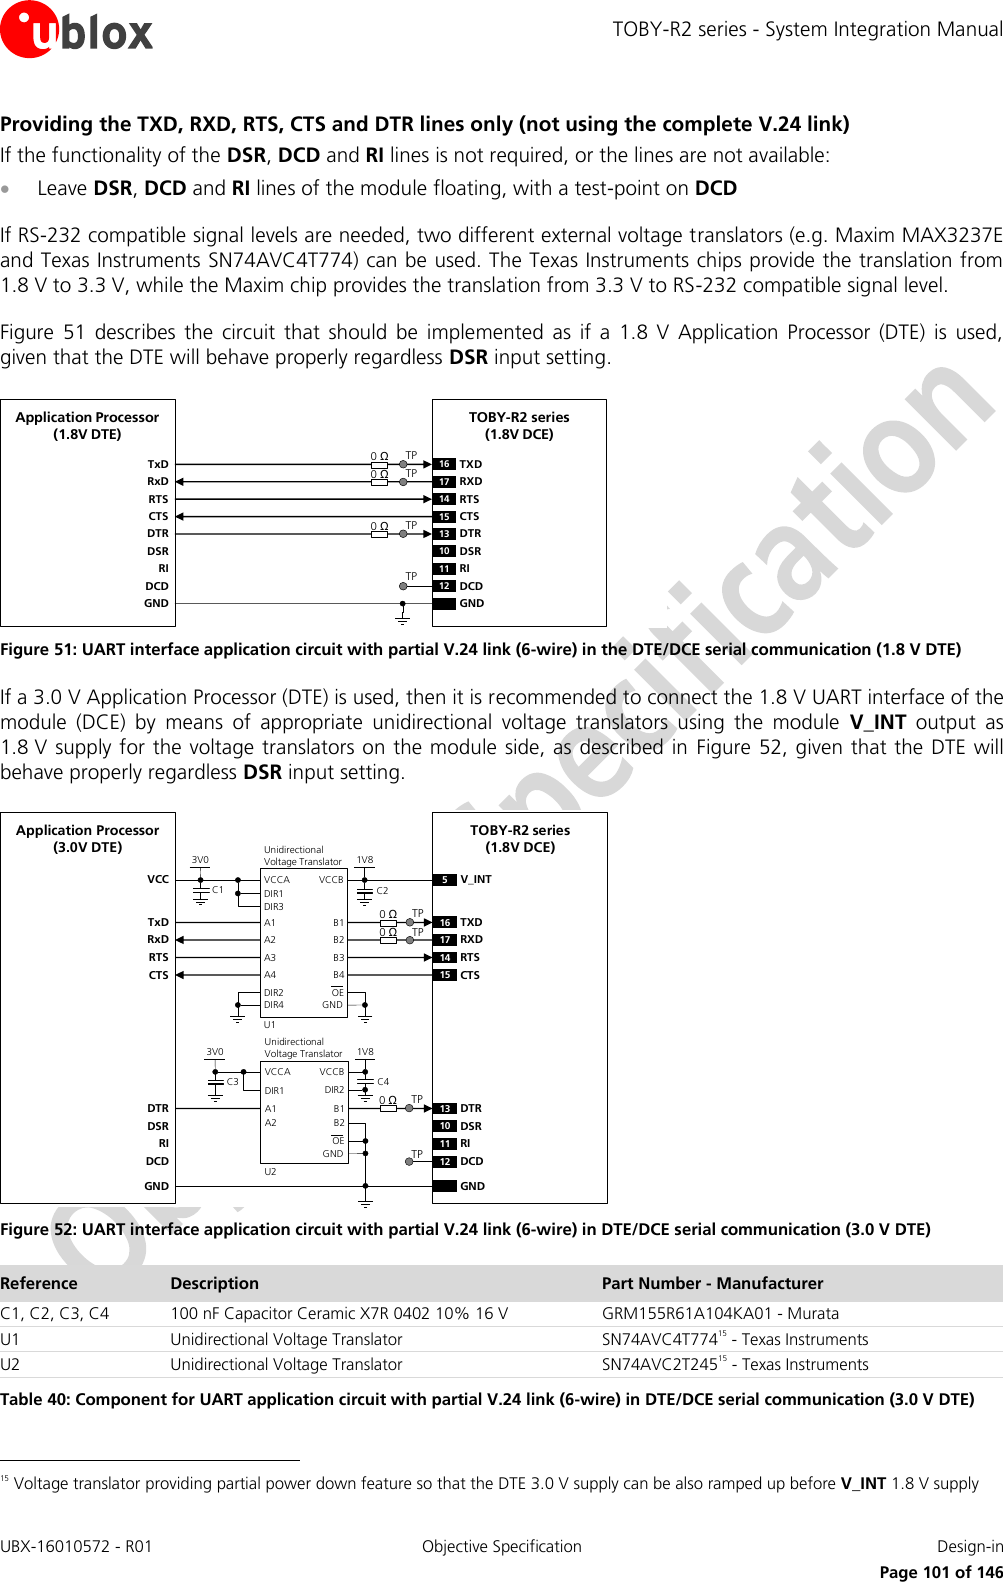 TOBY-R2 series - System Integration Manual UBX-16010572 - R01  Objective Specification  Design-in     Page 101 of 146 Providing the TXD, RXD, RTS, CTS and DTR lines only (not using the complete V.24 link) If the functionality of the DSR, DCD and RI lines is not required, or the lines are not available:  Leave DSR, DCD and RI lines of the module floating, with a test-point on DCD  If RS-232 compatible signal levels are needed, two different external voltage translators (e.g. Maxim MAX3237E and Texas Instruments SN74AVC4T774) can be used. The Texas Instruments chips provide the translation from 1.8 V to 3.3 V, while the Maxim chip provides the translation from 3.3 V to RS-232 compatible signal level.  Figure  51  describes  the  circuit  that  should  be  implemented  as  if  a  1.8  V  Application  Processor  (DTE)  is  used, given that the DTE will behave properly regardless DSR input setting. TxDApplication Processor(1.8V DTE)RxDRTSCTSDTRDSRRIDCDGNDTOBY-R2 series(1.8V DCE)16 TXD13 DTR17 RXD14 RTS15 CTS10 DSR11 RI12 DCDGND0 Ω0 ΩTPTP0 ΩTPTP Figure 51: UART interface application circuit with partial V.24 link (6-wire) in the DTE/DCE serial communication (1.8 V DTE) If a 3.0 V Application Processor (DTE) is used, then it is recommended to connect the 1.8 V UART interface of the module  (DCE)  by  means  of  appropriate  unidirectional  voltage  translators  using  the  module  V_INT  output  as 1.8 V supply for the voltage translators on the module side, as described in  Figure 52, given that the DTE will behave properly regardless DSR input setting. 5V_INTTxDApplication Processor(3.0V DTE)RxDRTSCTSDTRDSRRIDCDGNDTOBY-R2 series(1.8V DCE)16 TXD13 DTR17 RXD14 RTS15 CTS10 DSR11 RI12 DCDGND0 Ω0 ΩTPTP0 ΩTPTP1V8B1 A1GNDU1B3A3VCCBVCCAUnidirectionalVoltage TranslatorC1 C23V0DIR3DIR2 OEDIR1VCCB2 A2B4A4DIR41V8B1 A1GNDU2VCCBVCCAUnidirectionalVoltage TranslatorC33V0DIR1OEB2 A2DIR2 C4 Figure 52: UART interface application circuit with partial V.24 link (6-wire) in DTE/DCE serial communication (3.0 V DTE) Reference Description Part Number - Manufacturer C1, C2, C3, C4 100 nF Capacitor Ceramic X7R 0402 10% 16 V GRM155R61A104KA01 - Murata U1 Unidirectional Voltage Translator SN74AVC4T77415 - Texas Instruments U2 Unidirectional Voltage Translator SN74AVC2T24515 - Texas Instruments Table 40: Component for UART application circuit with partial V.24 link (6-wire) in DTE/DCE serial communication (3.0 V DTE)                                                       15 Voltage translator providing partial power down feature so that the DTE 3.0 V supply can be also ramped up before V_INT 1.8 V supply 